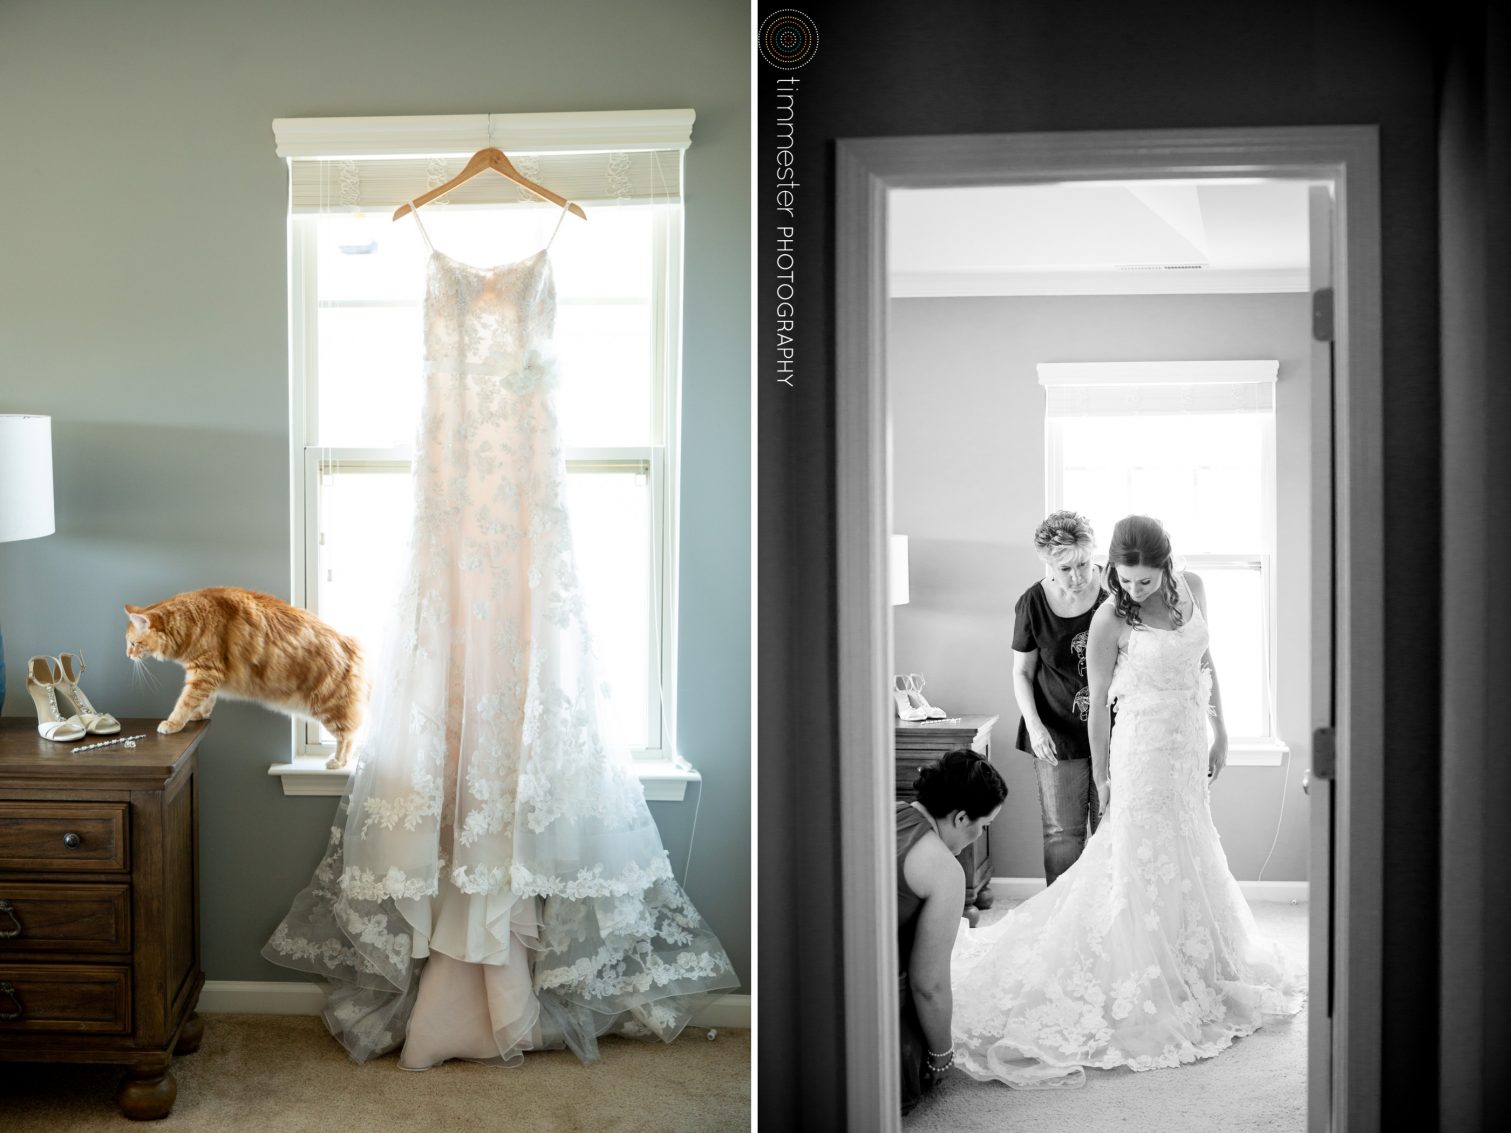 A wedding in Raleigh, NC where the couple's curious cat made an appearance!